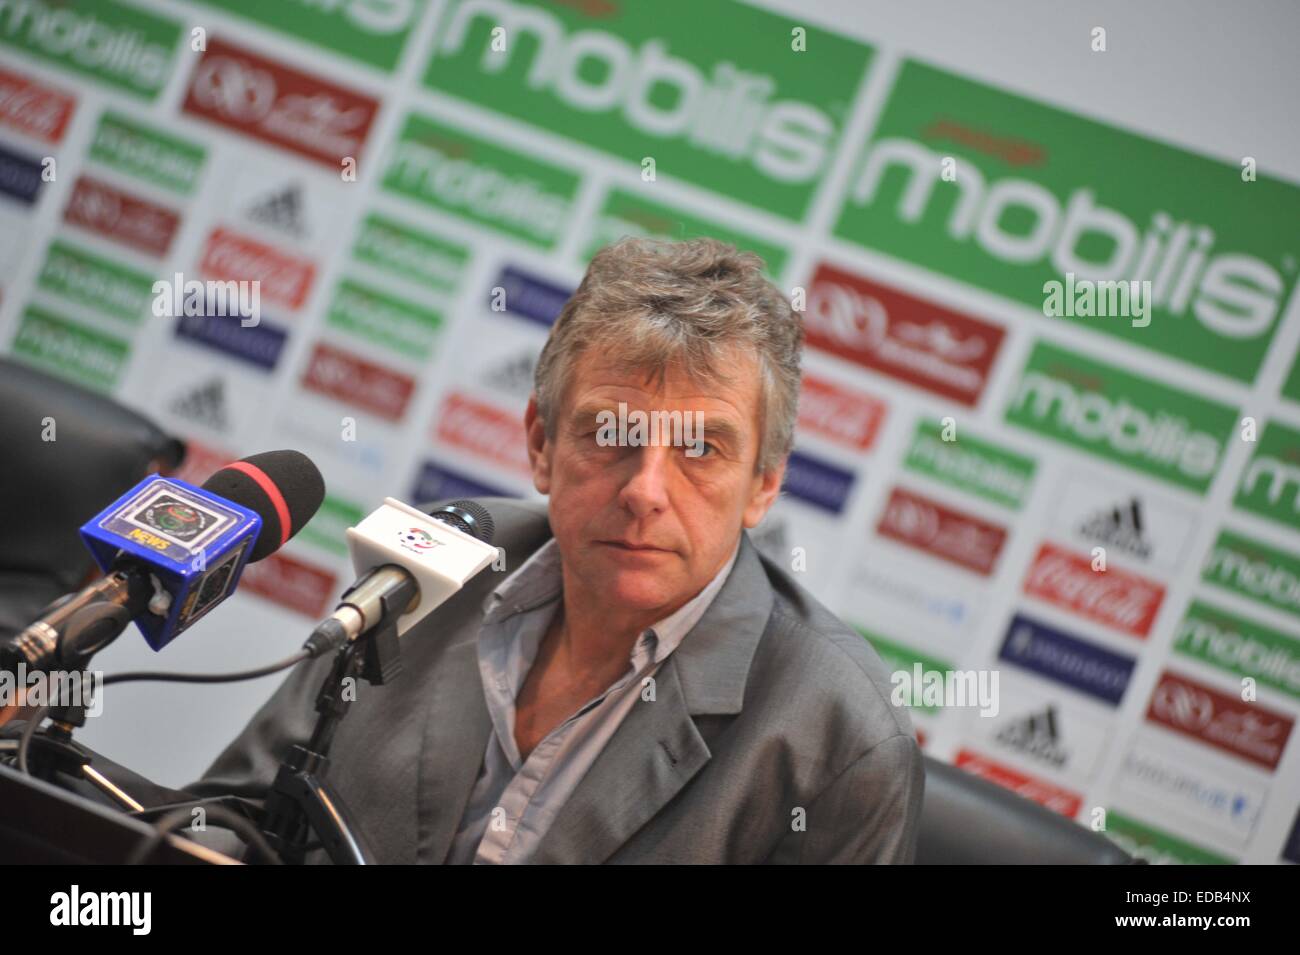 Algiers. 5th Jan, 2015. Algerian national football team head coach Christian Gourcuff answers questions about the upcoming Africa Cup of Nations during a news conference in Algiers, capital of Algeria, Jan. 4, 2015. The 2015 Africa Cup of Nations will be held in Equatorial Guinea from Jan. 17 to Feb. 8. © Xinhua/Alamy Live News Stock Photo